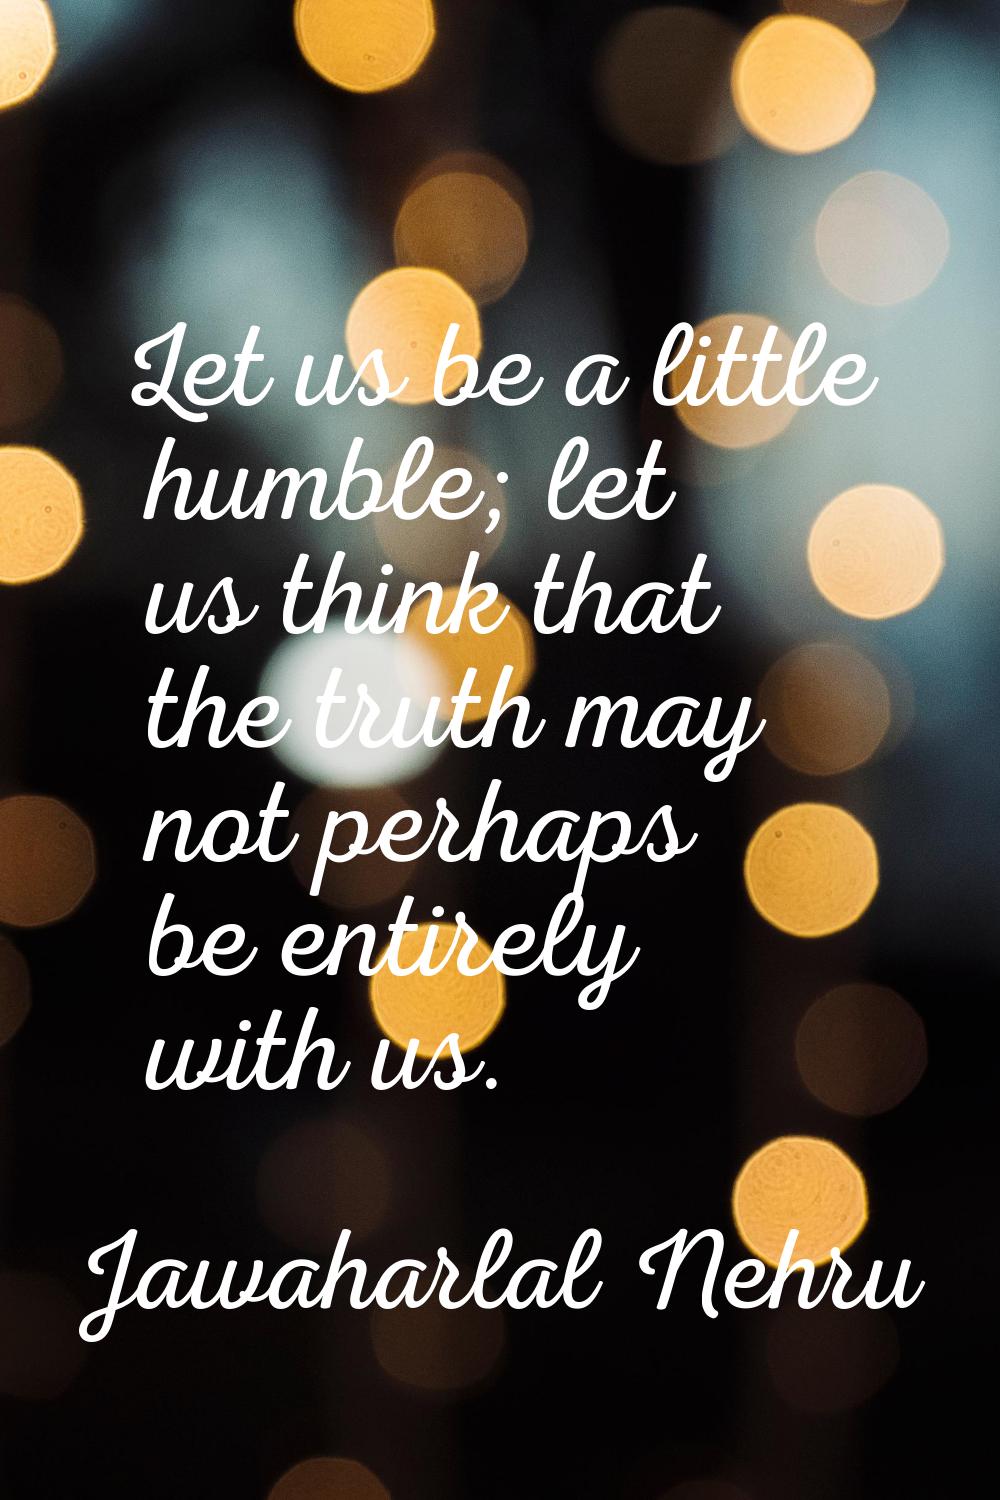 Let us be a little humble; let us think that the truth may not perhaps be entirely with us.